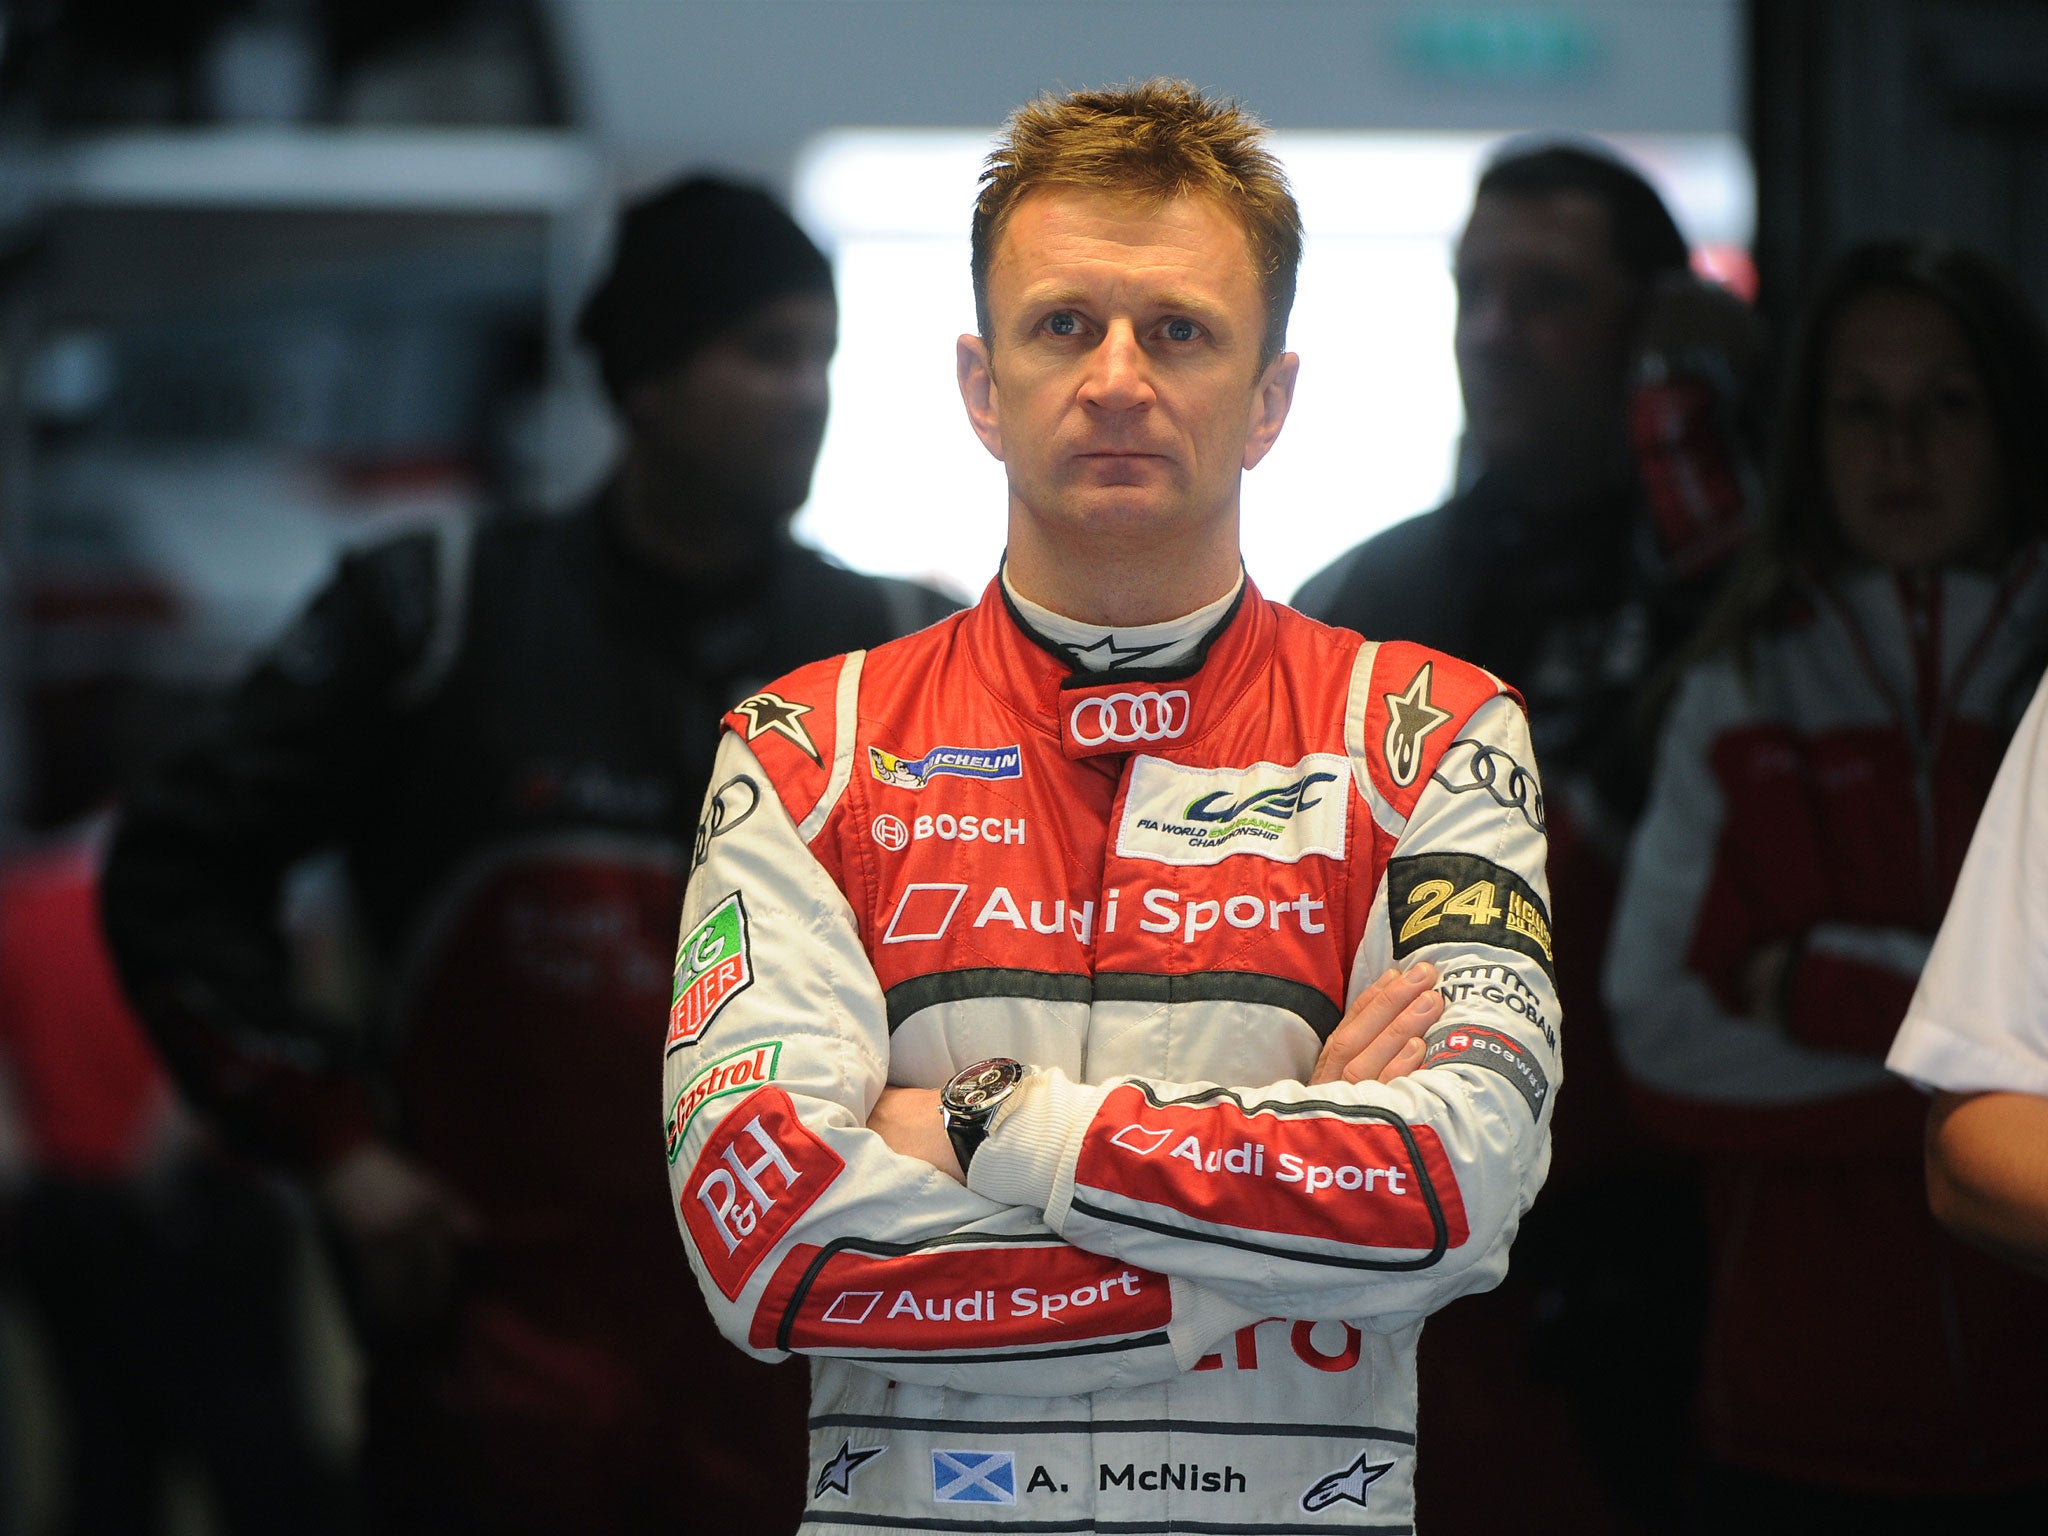 Allan McNish has announced his retirement from motor racing